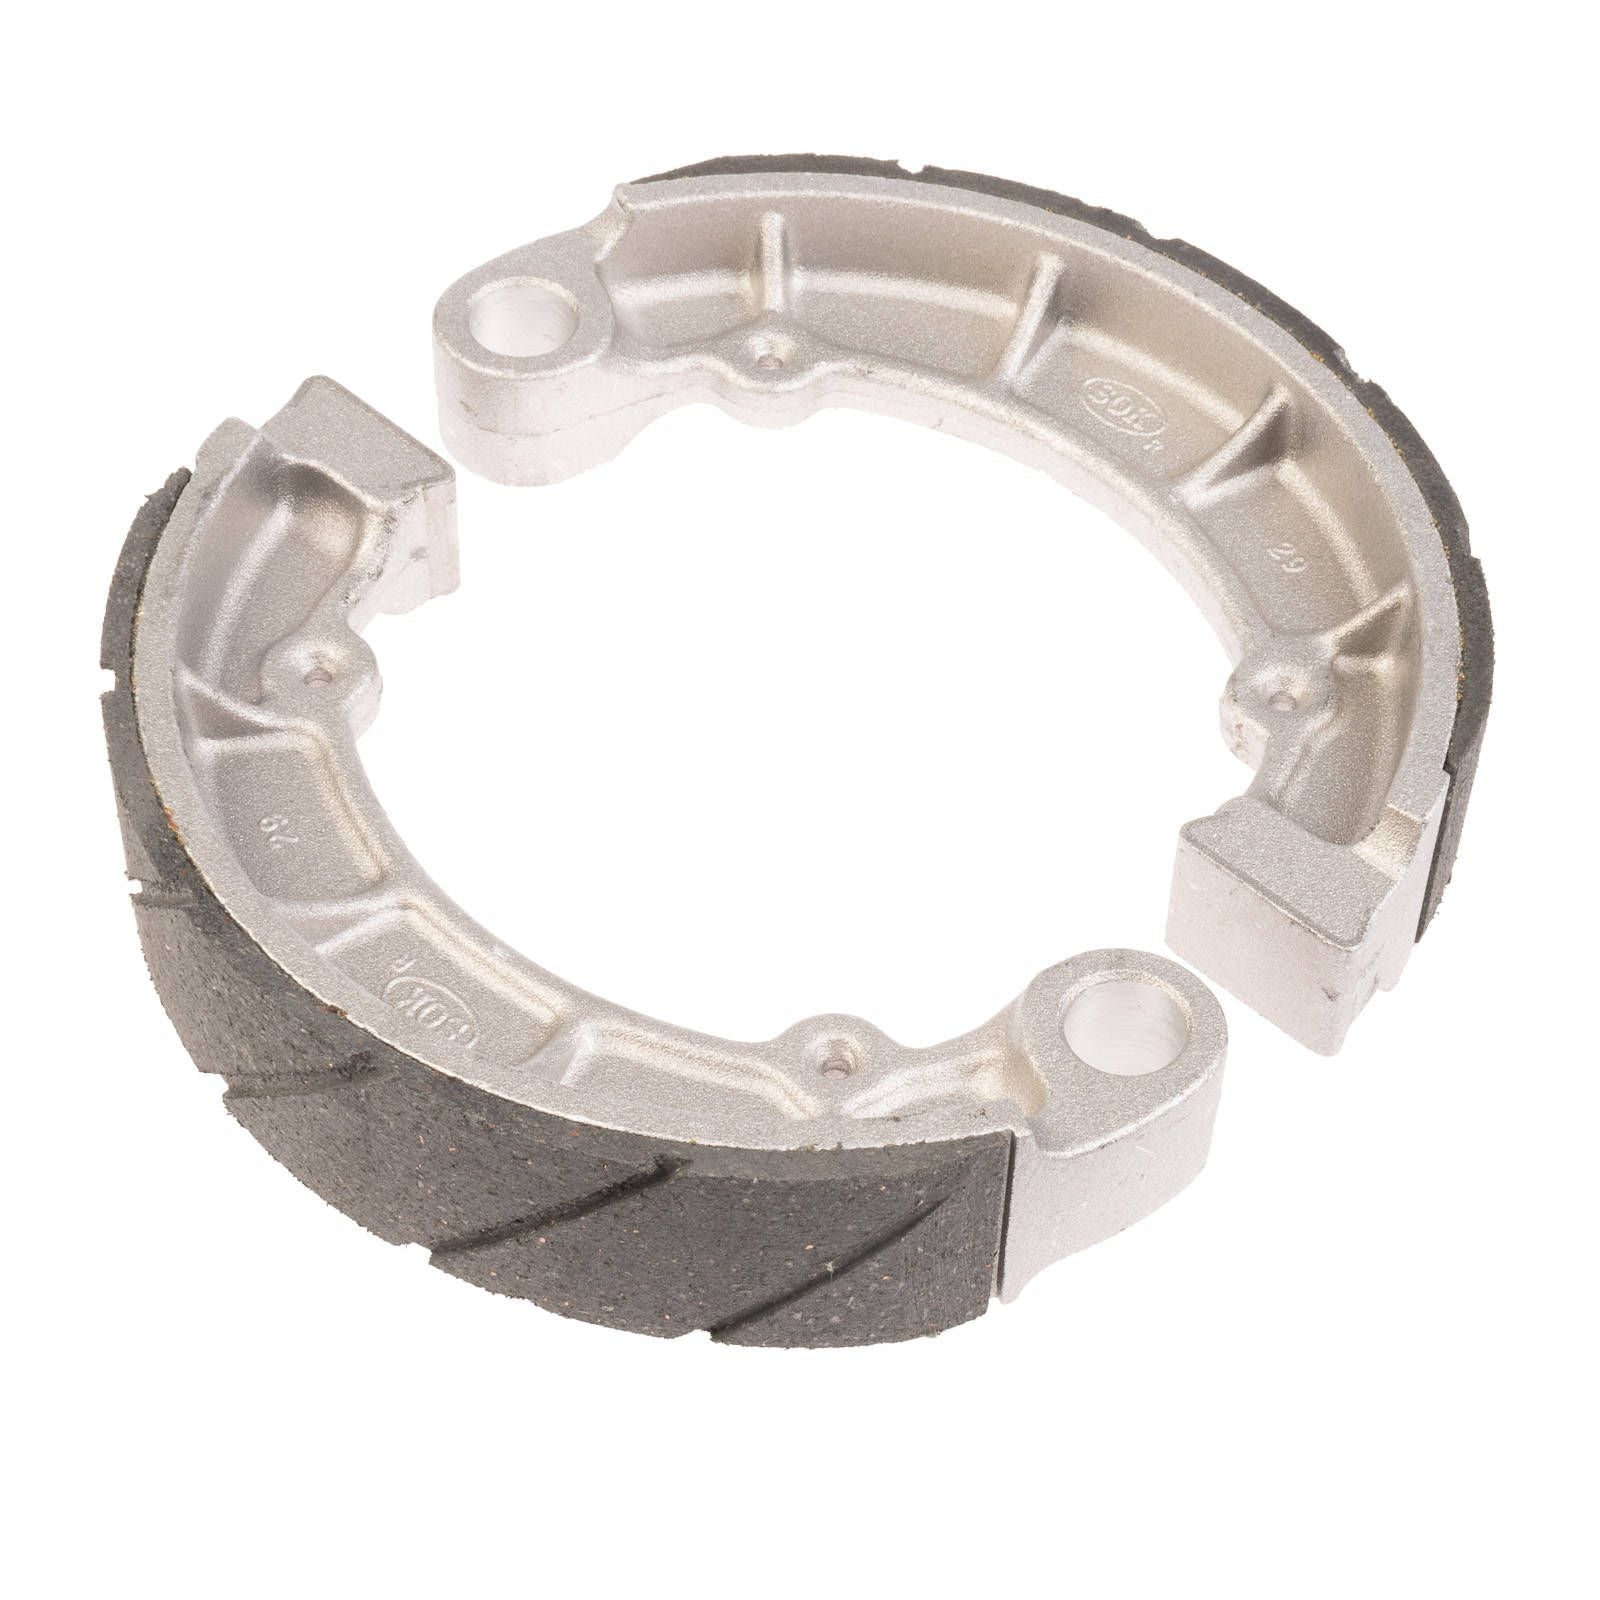 New WHITES Motorcycle Brake Shoes - Water Groove #WPBS42068